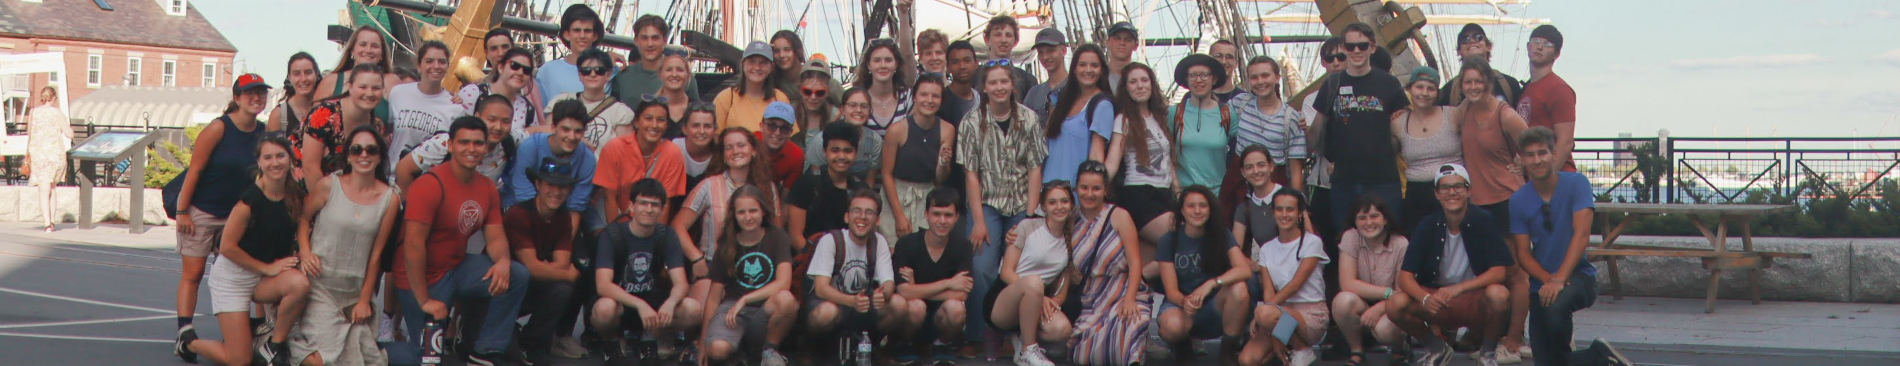 Summer Program students at the USS Constitution